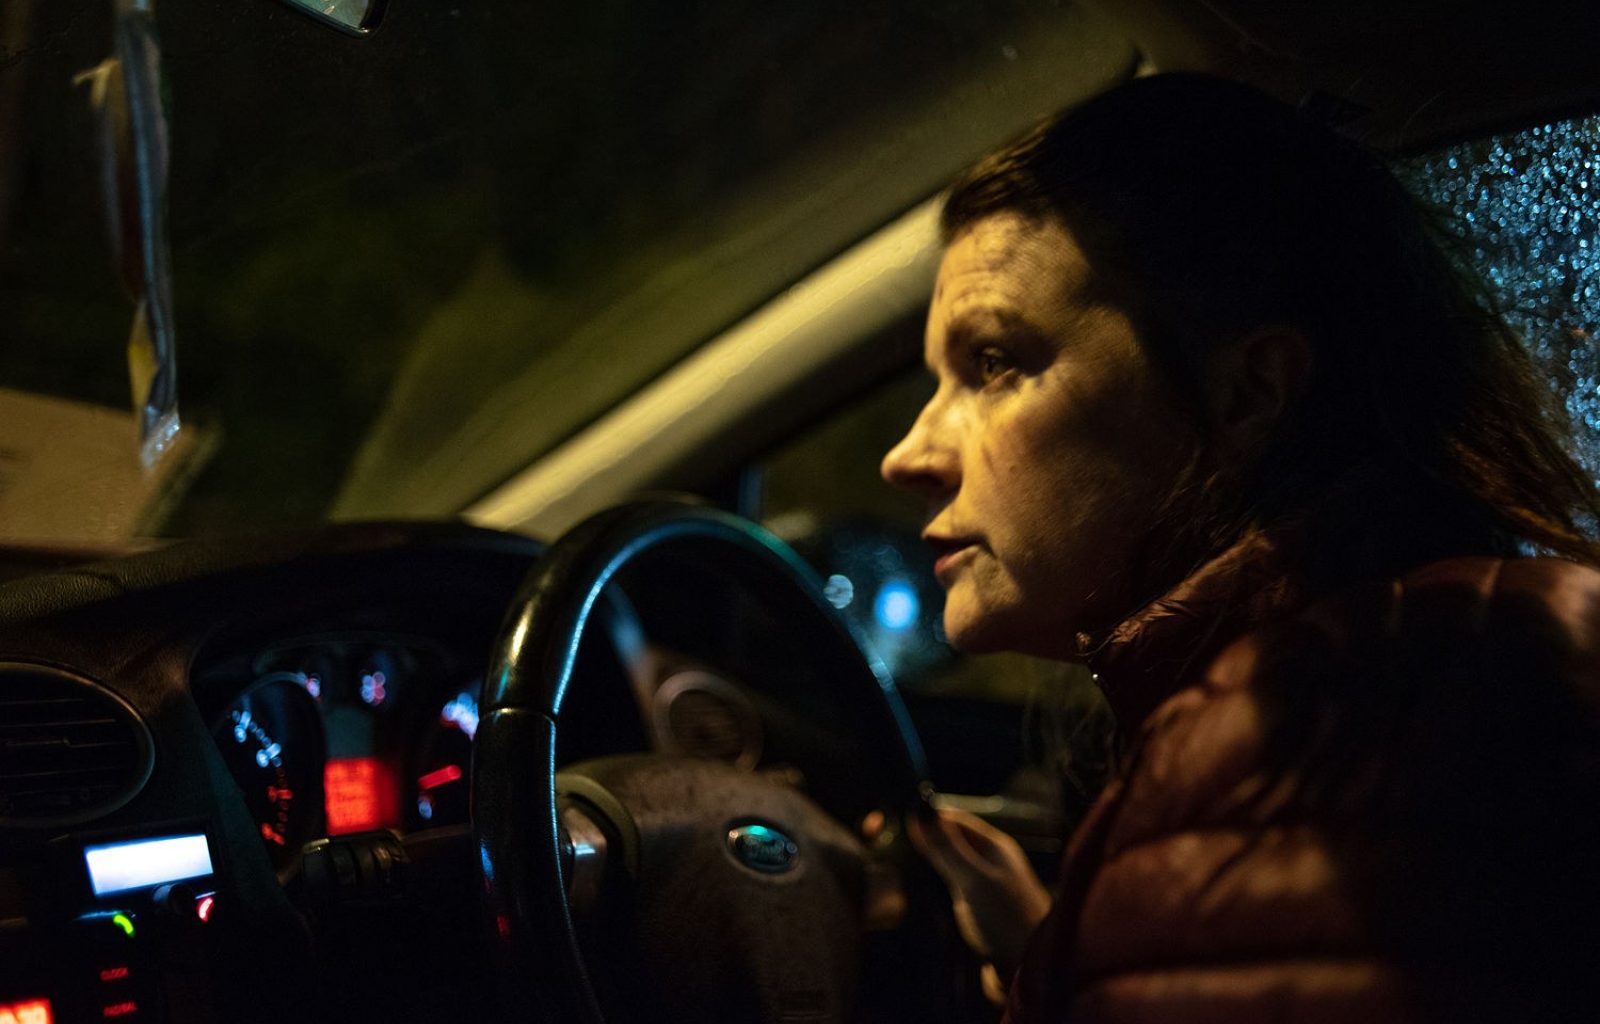 A woman sits at the wheel of a car looking out of the windscreen. The car dash lights are on and it's dark outside, a streetlight lights the woman's face.